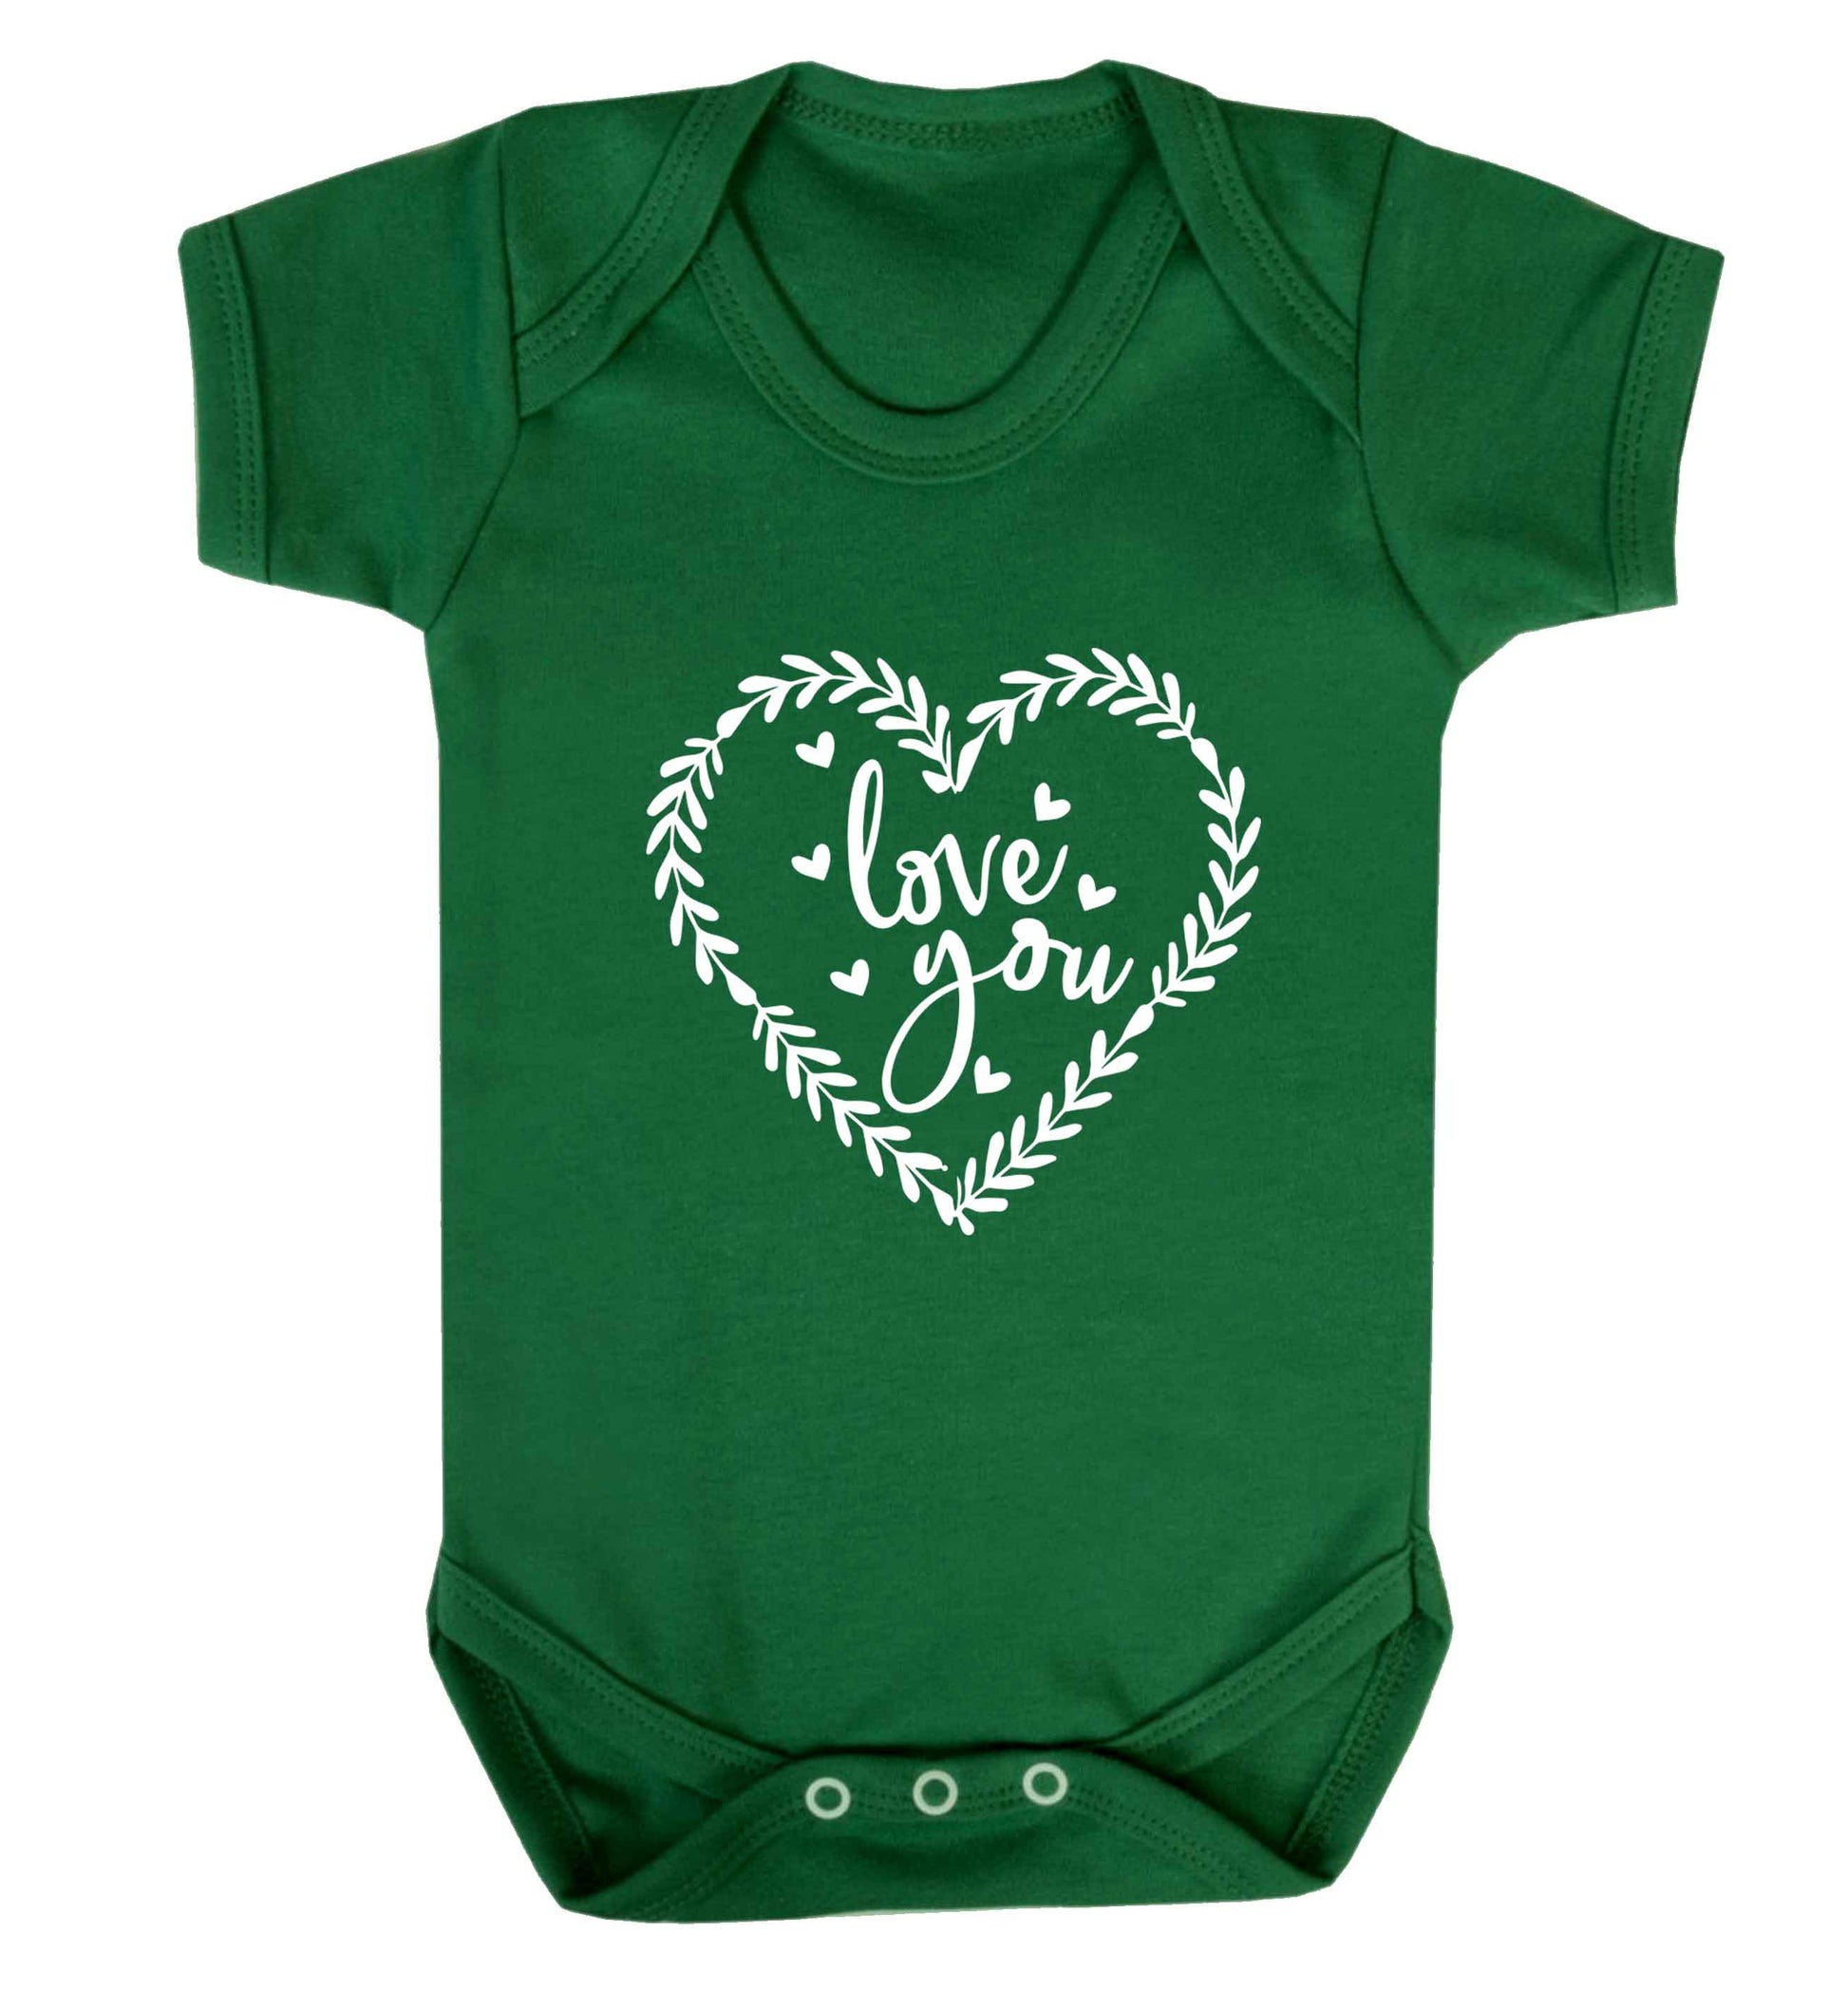 Love you baby vest green 18-24 months